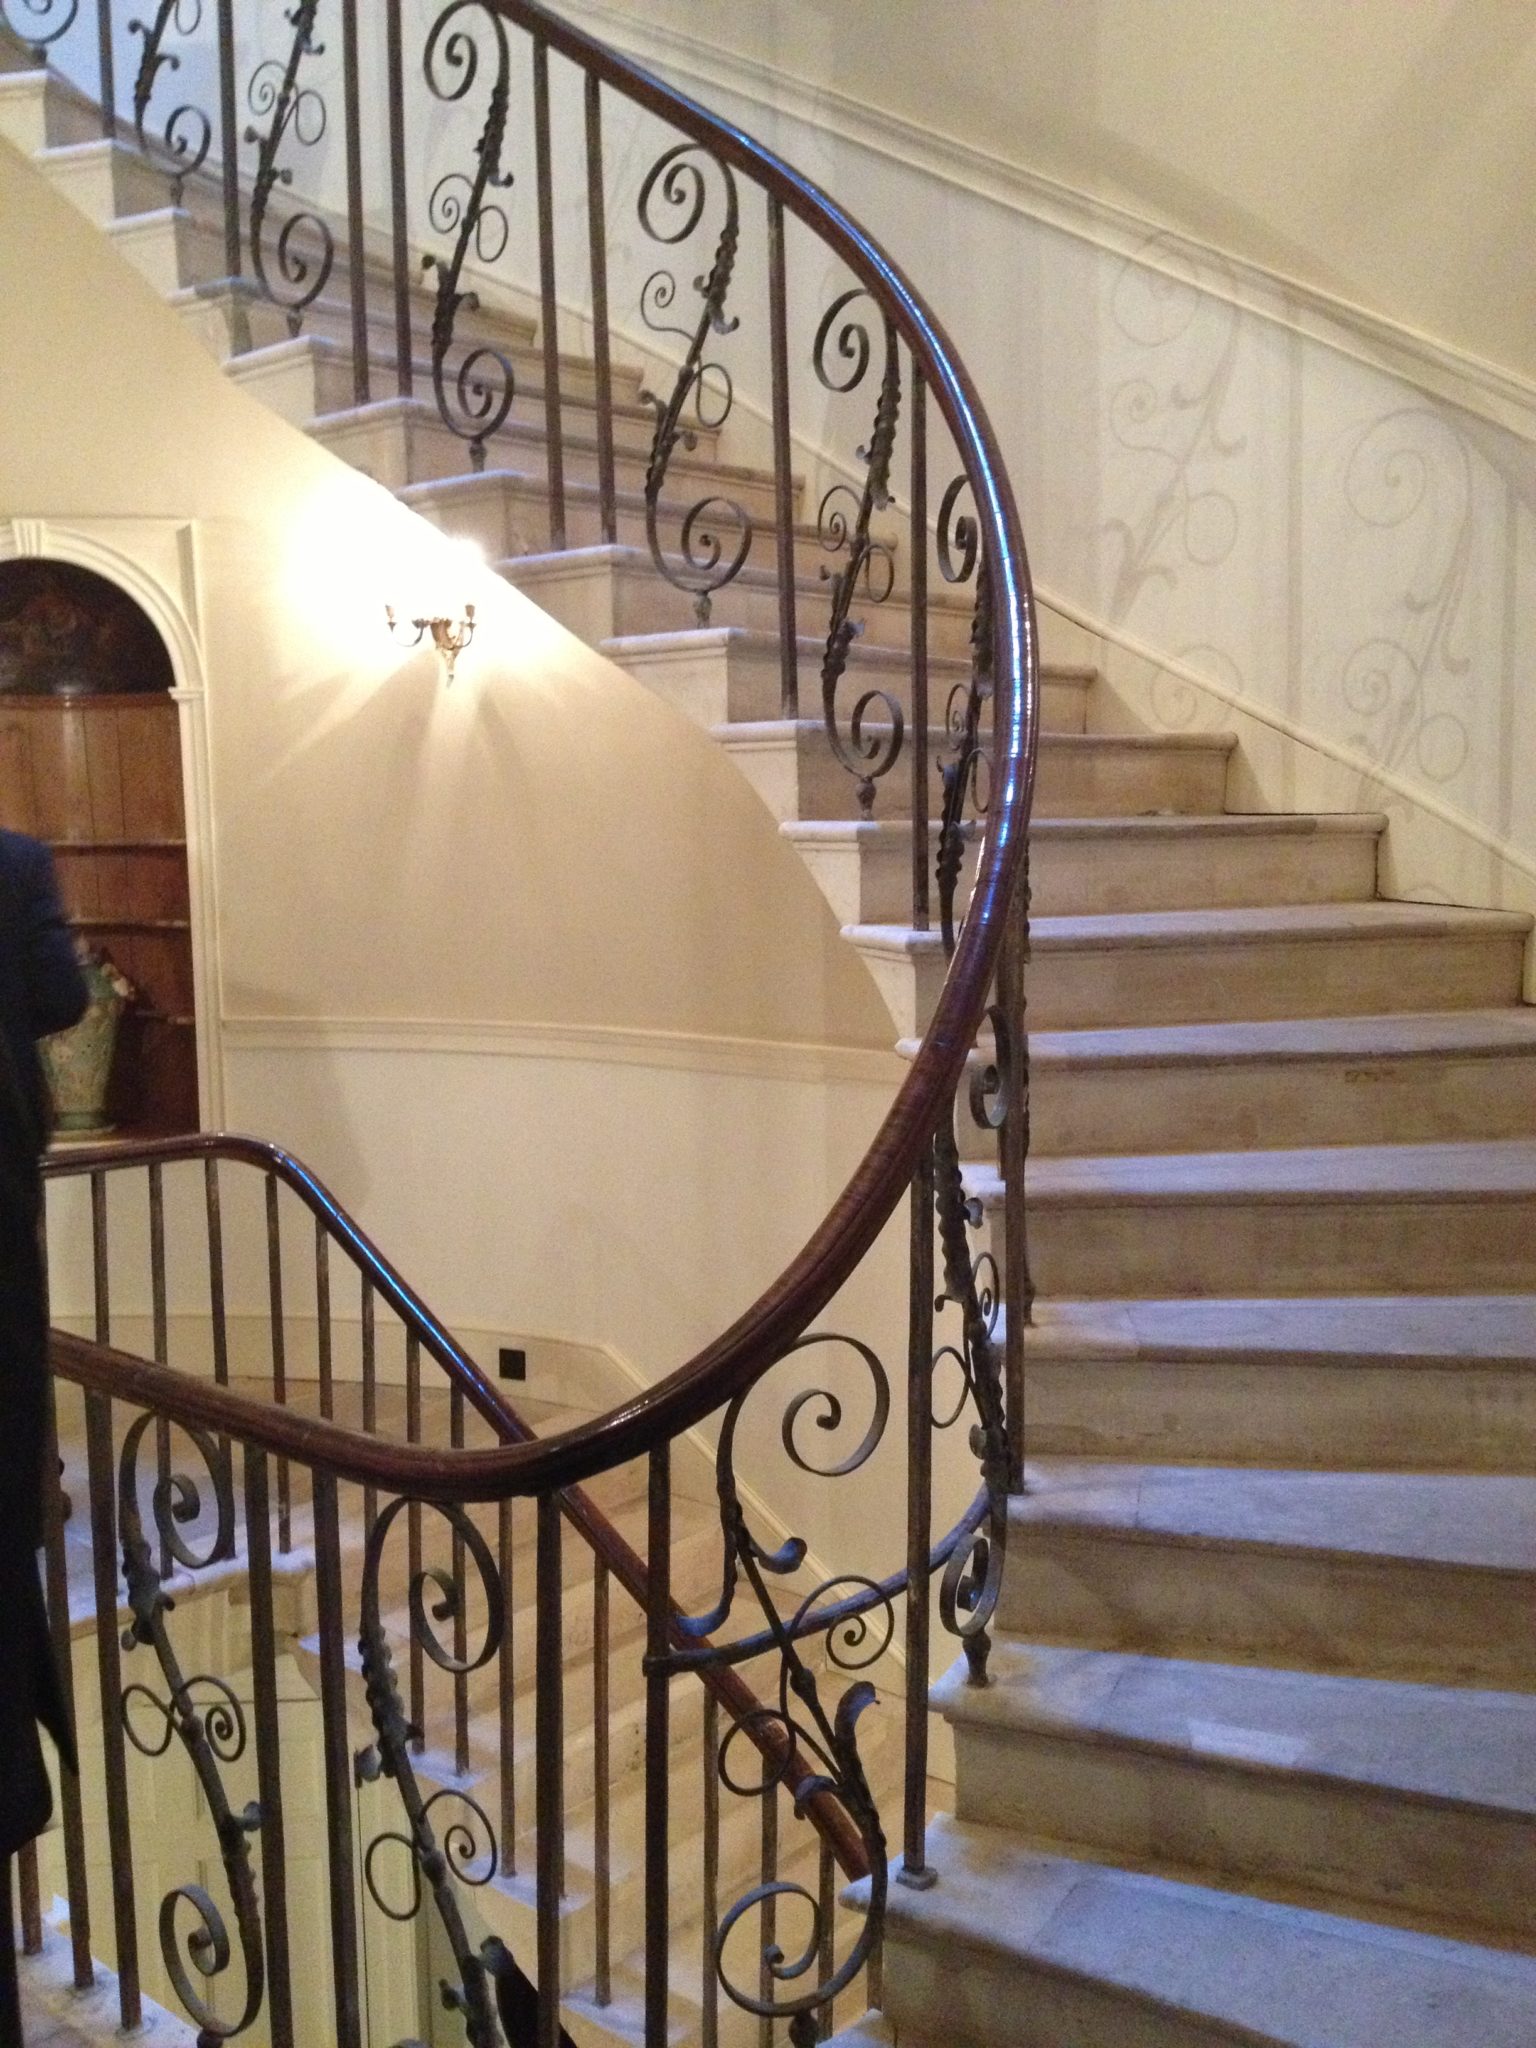 Ornate but elegant iron balustrades. Note the simpler straight iron balustrade design going down to the servats quarters.